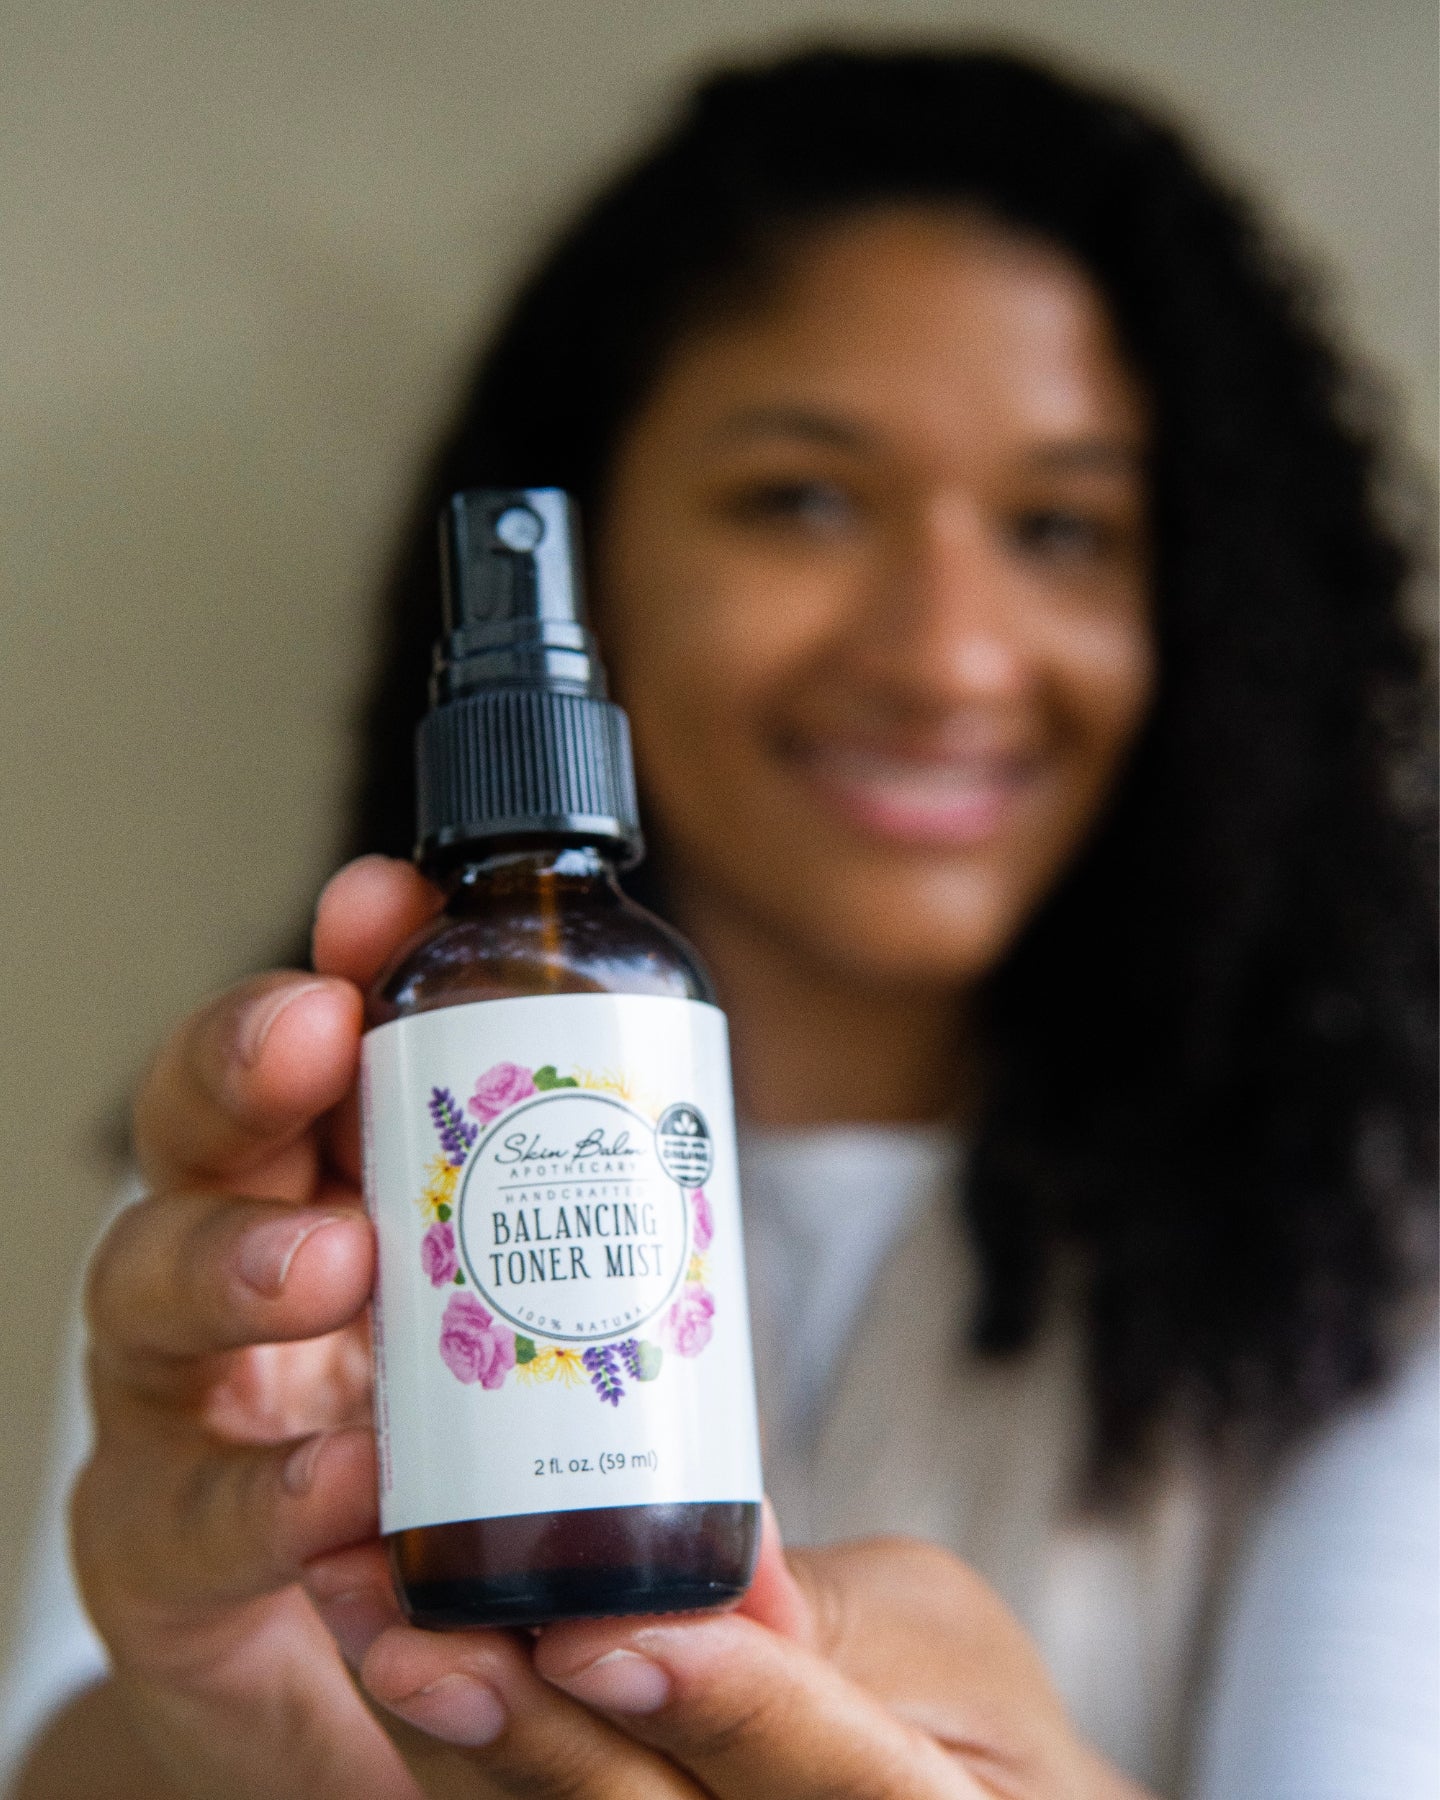 Balancing Toner Mist focused in the foreground with a smiling woman blurred in the background.